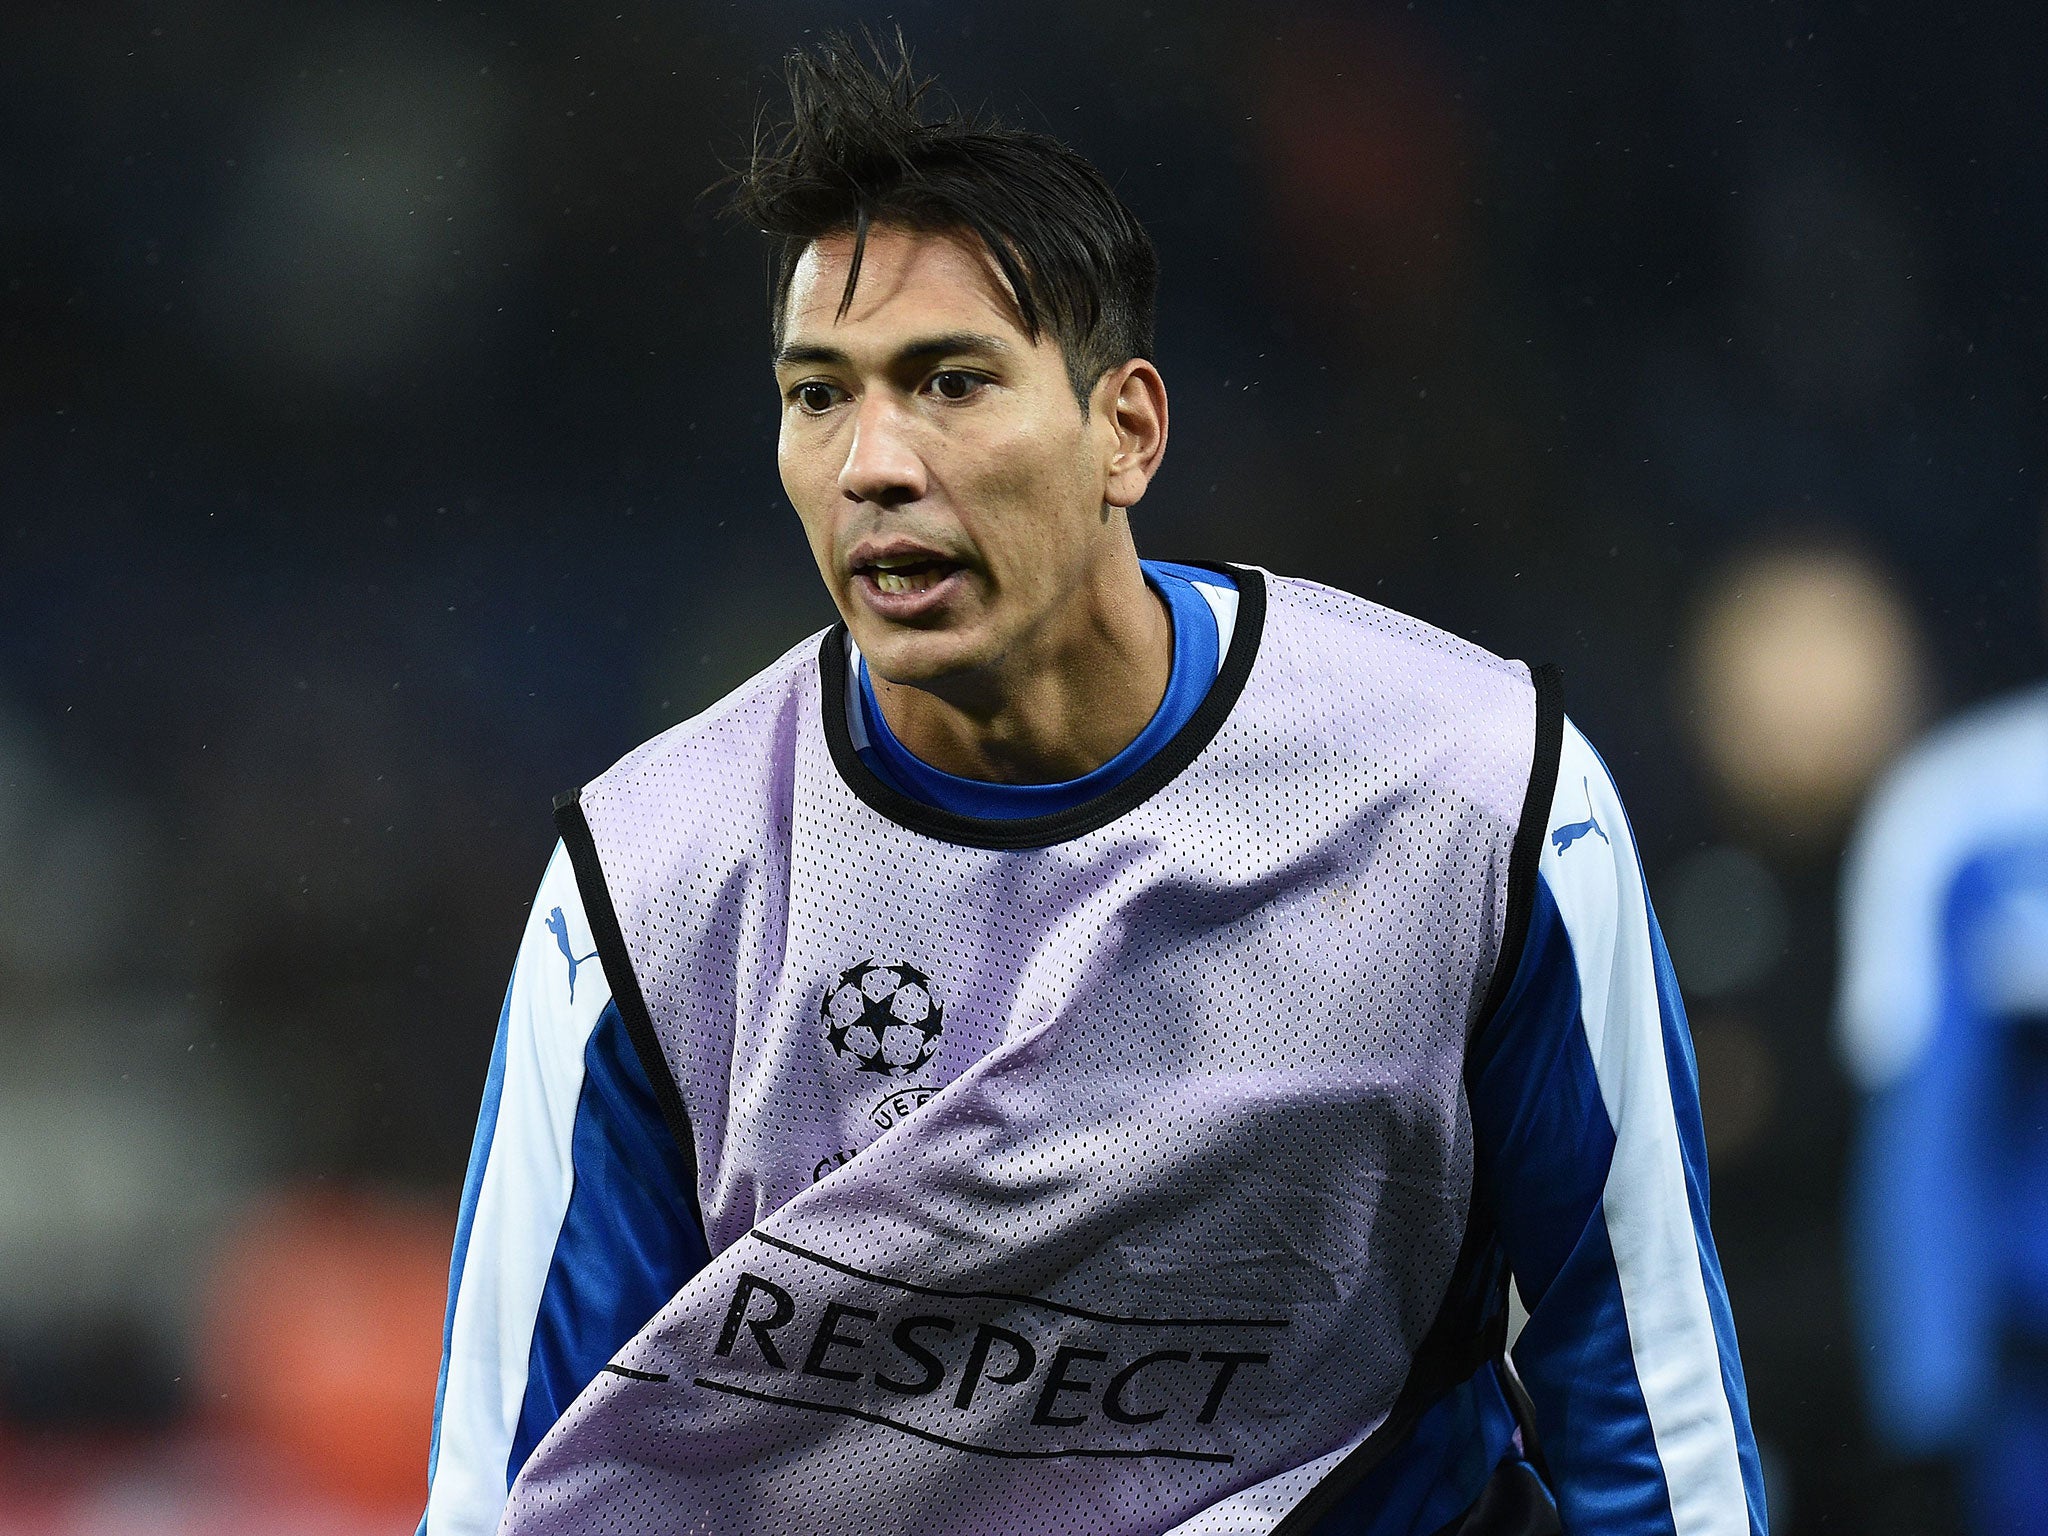 Leonardo Ulloa says he feels 'betrayed' by Leicester manager Claudio Ranieri and won't play for the club again